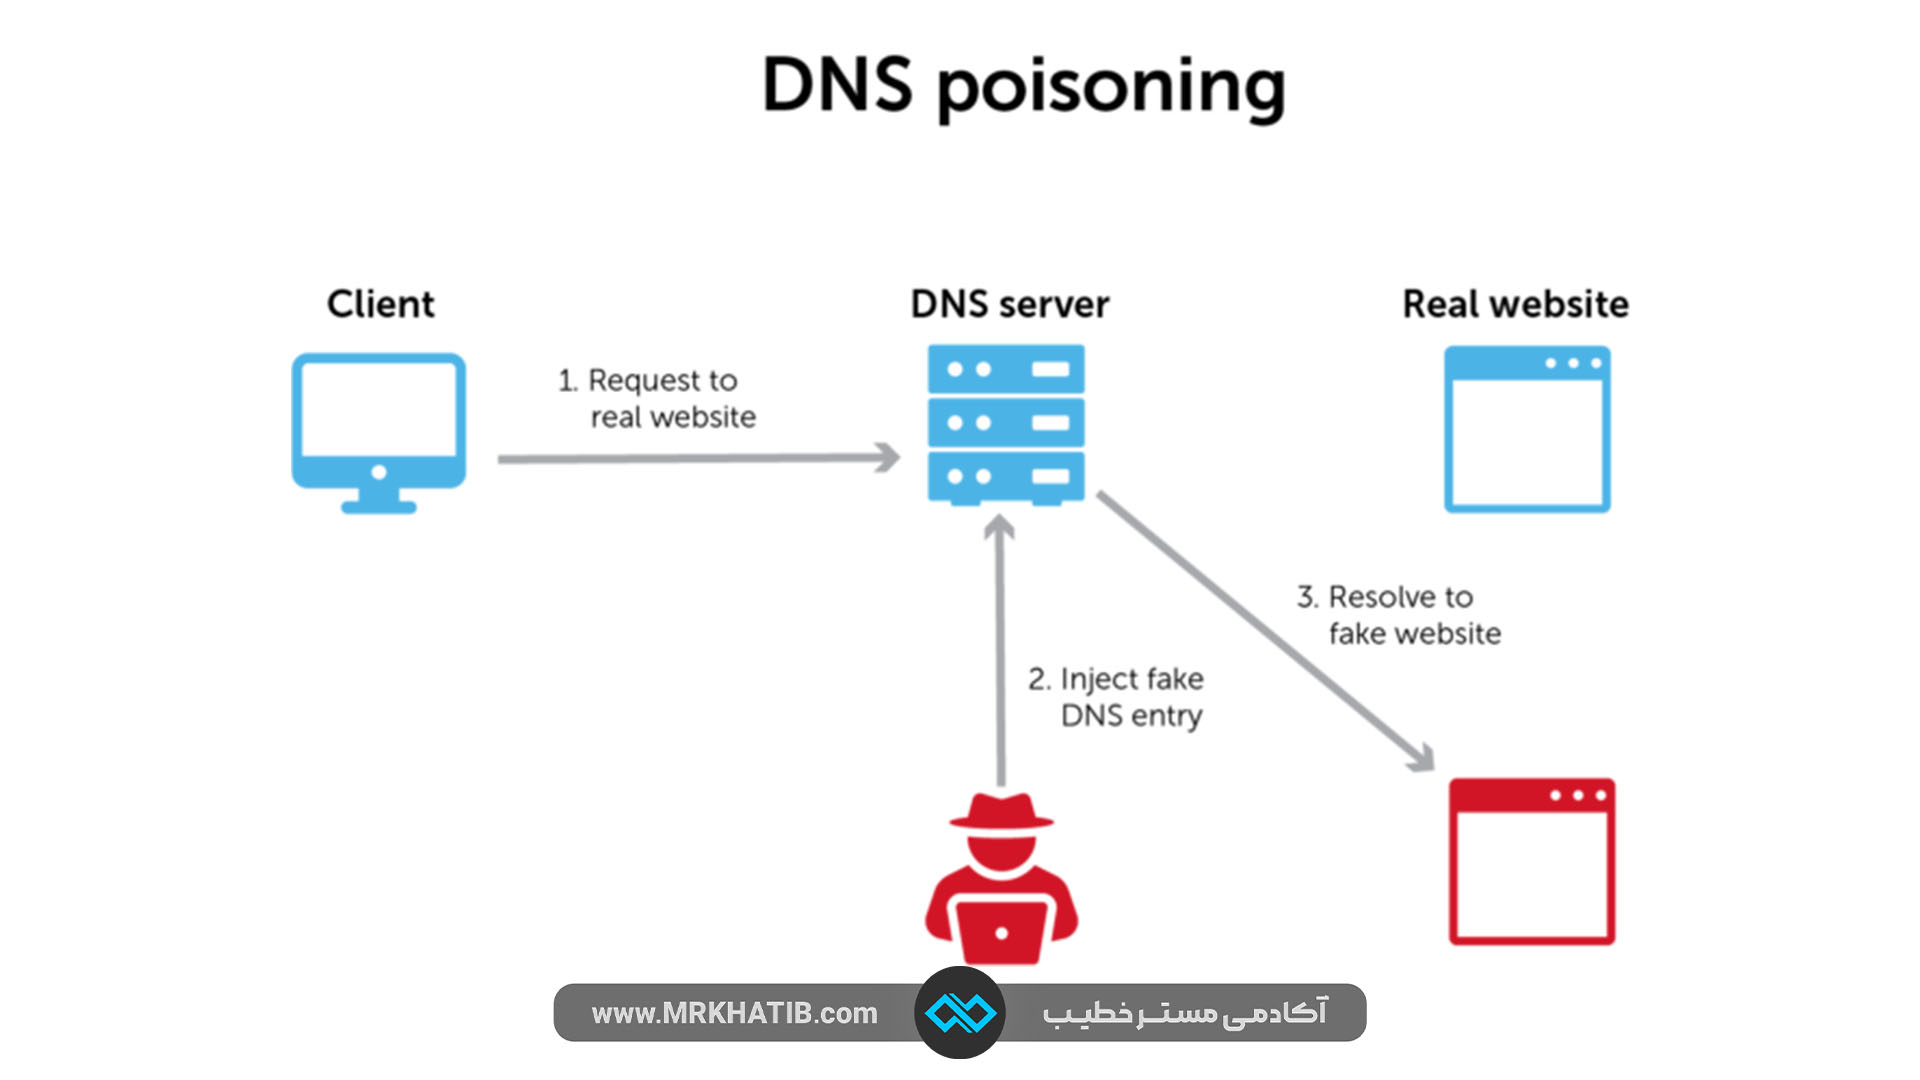 dns poisoning